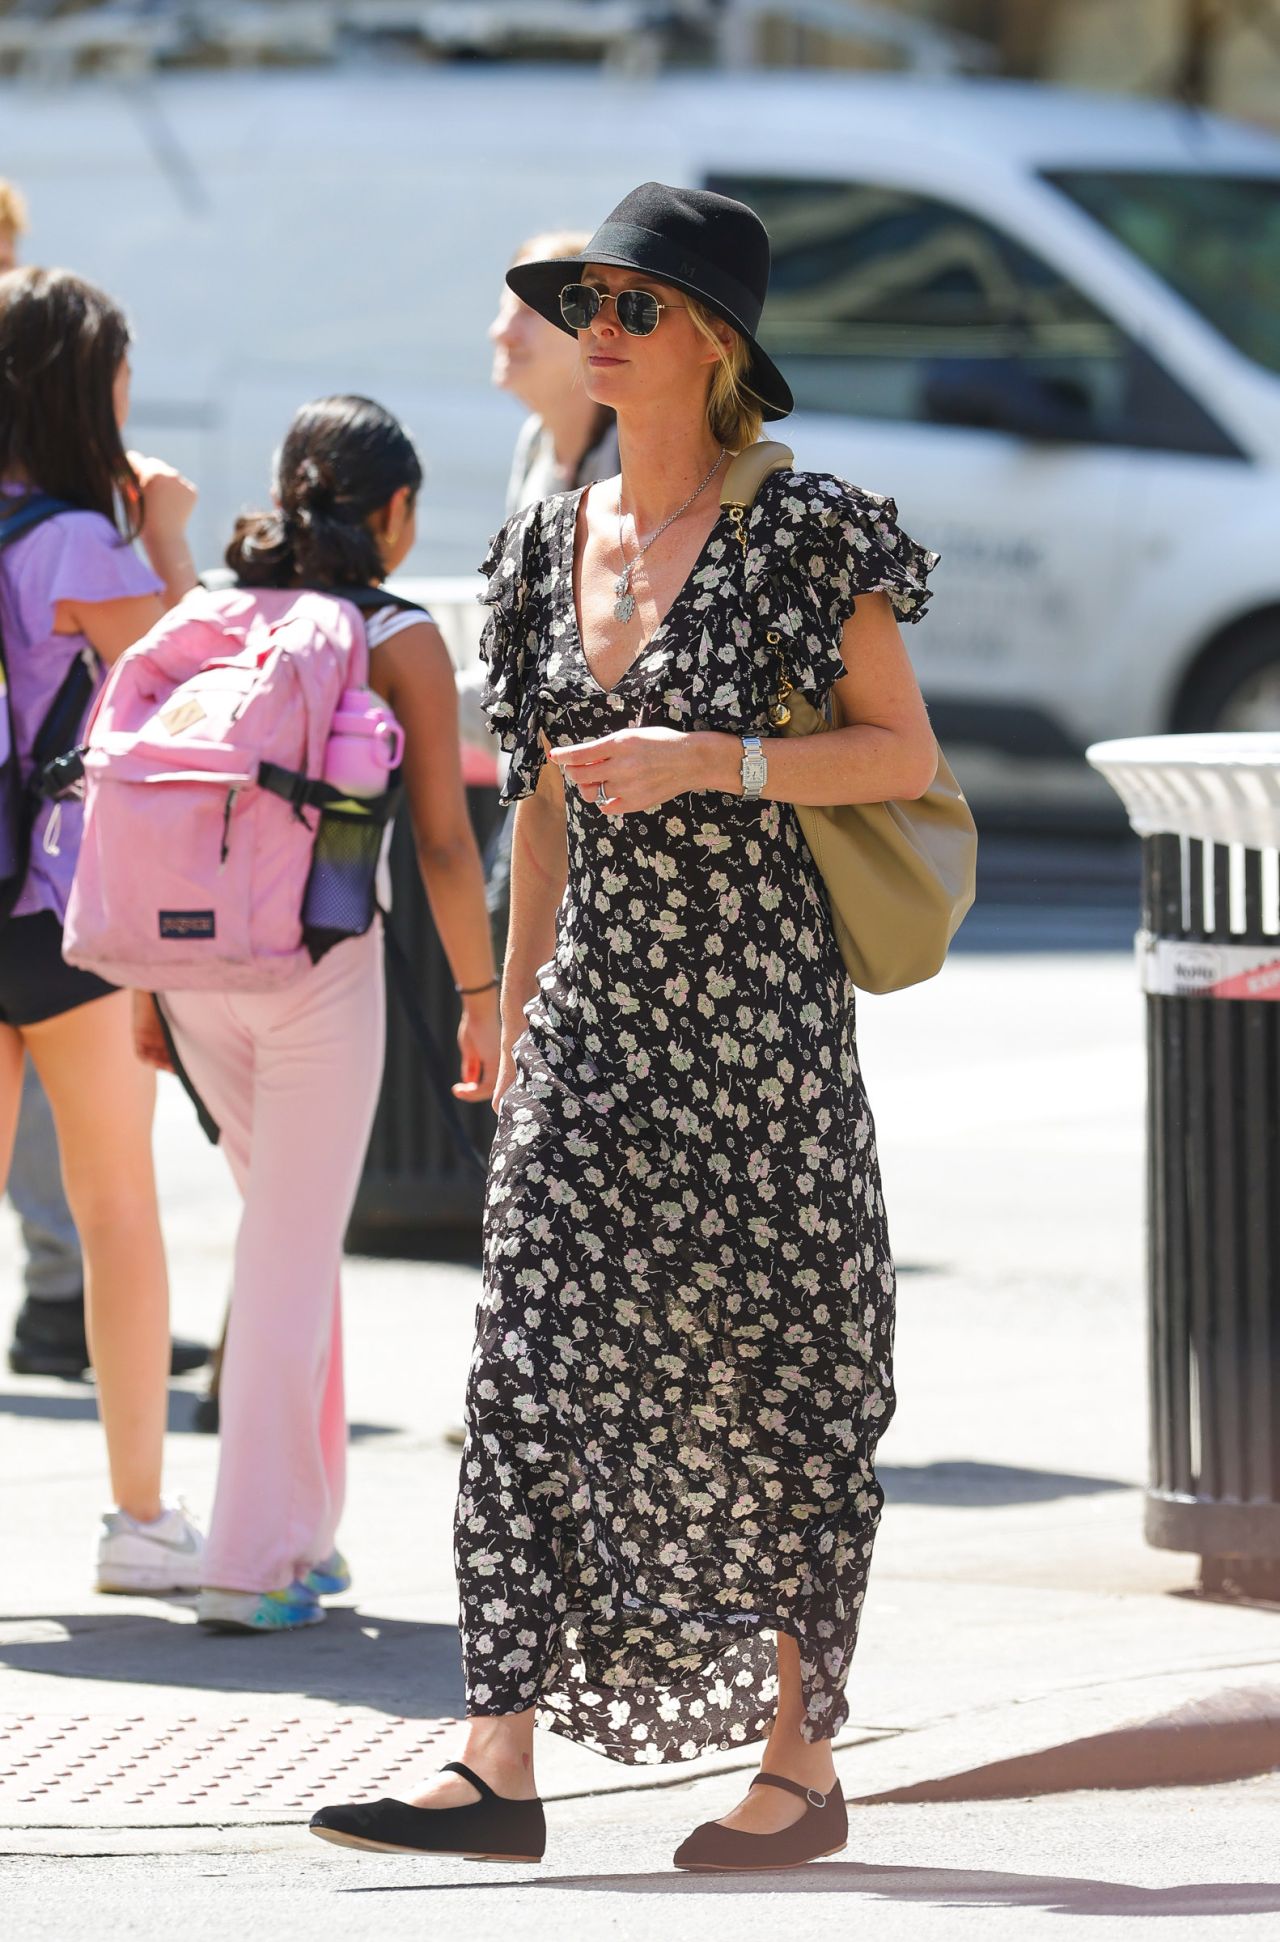 NICKY HILTON WAS SPOTTED OUT ENJOYING A WALK IN THE BIG APPLE2